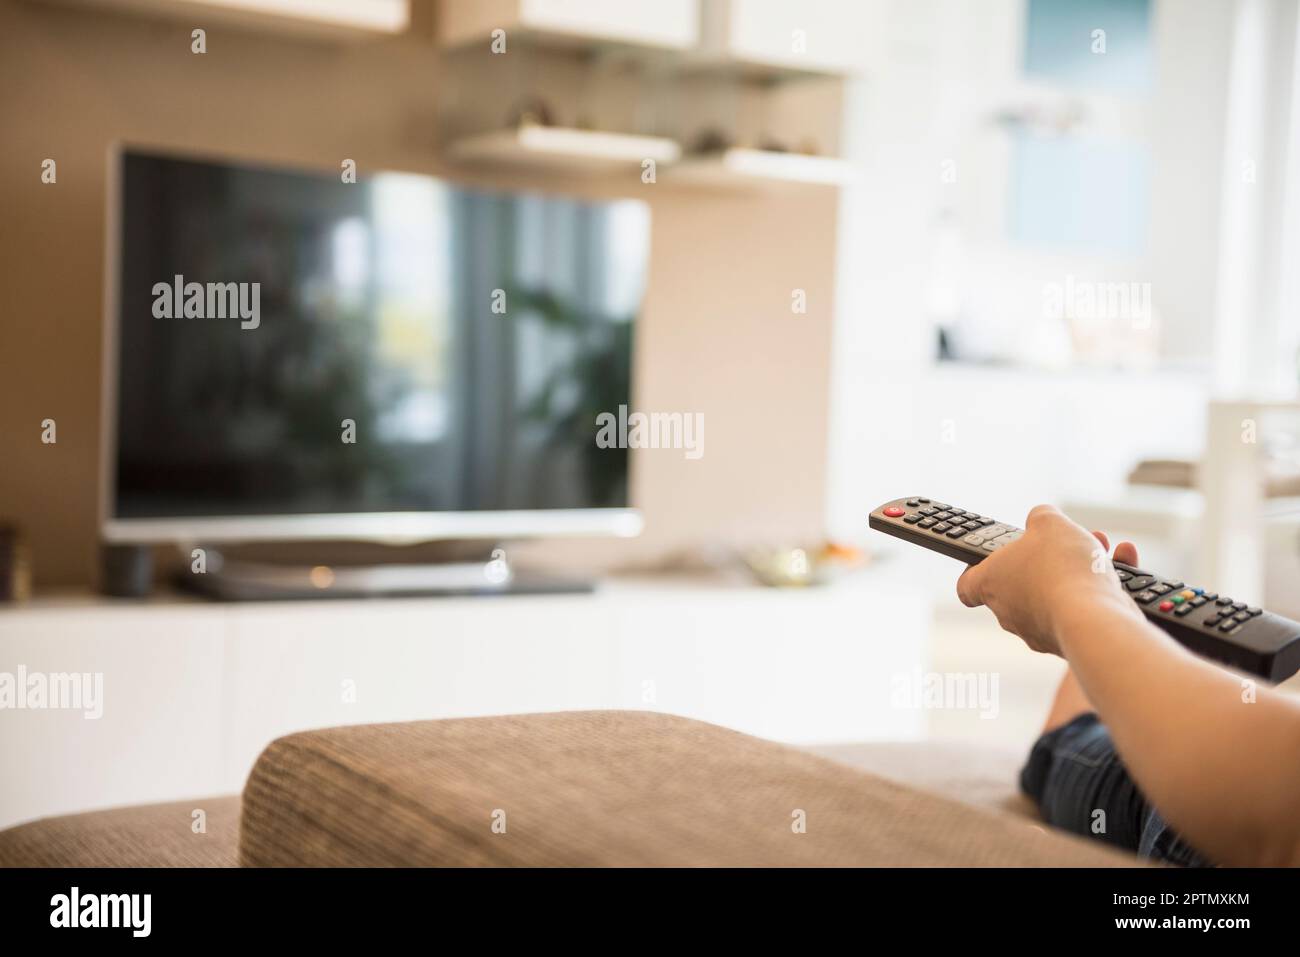 Woman watching TV with remote control in her hand, Munich, Bavaria, Germany Stock Photo